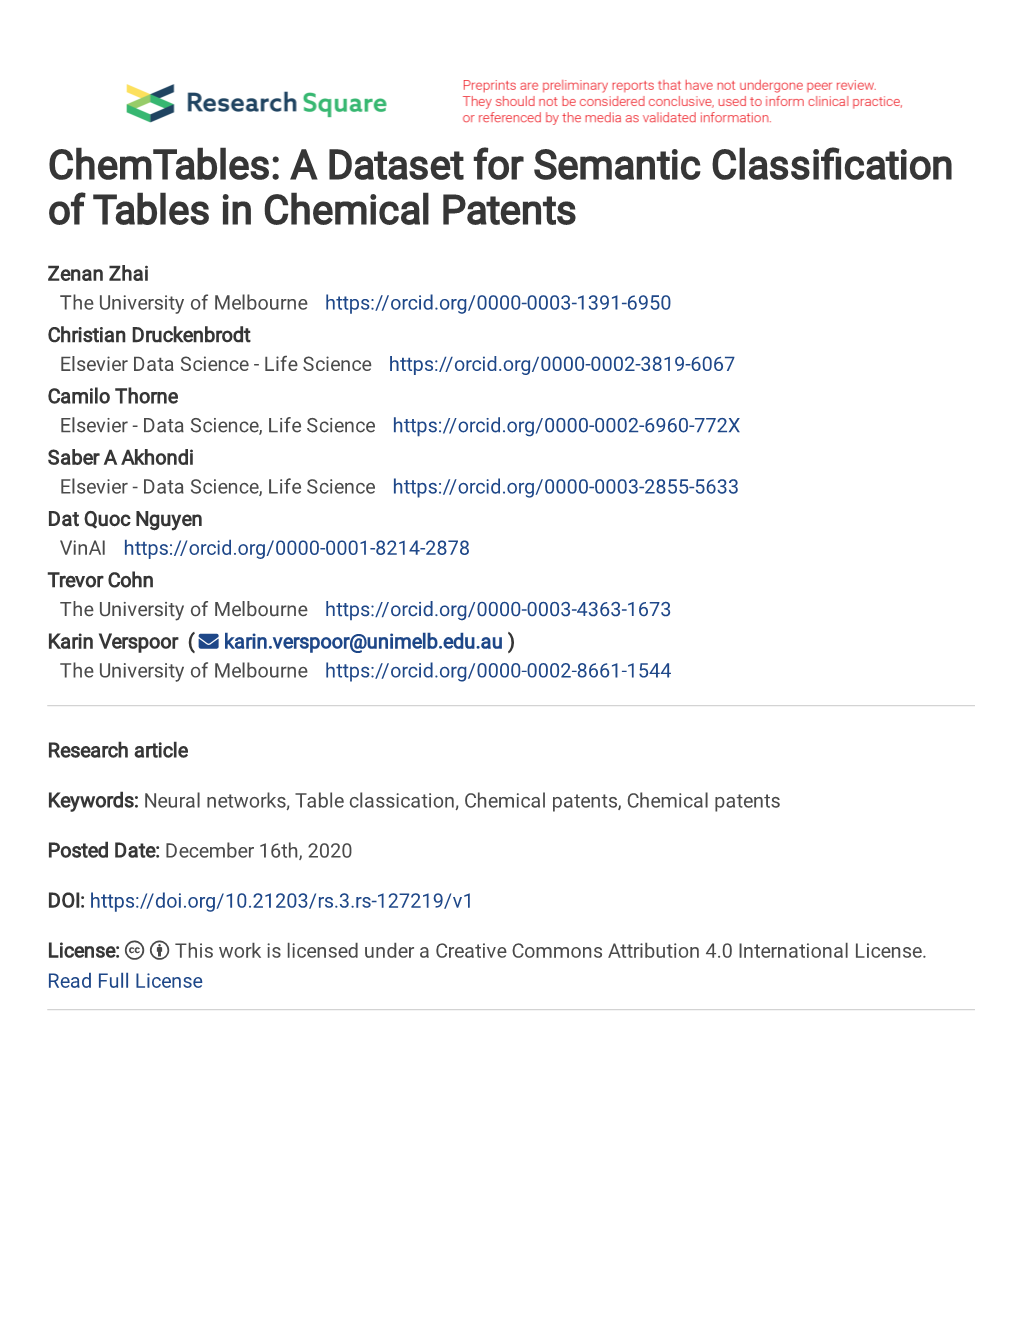 A Dataset for Semantic Classification on Tables in Chemical Patents